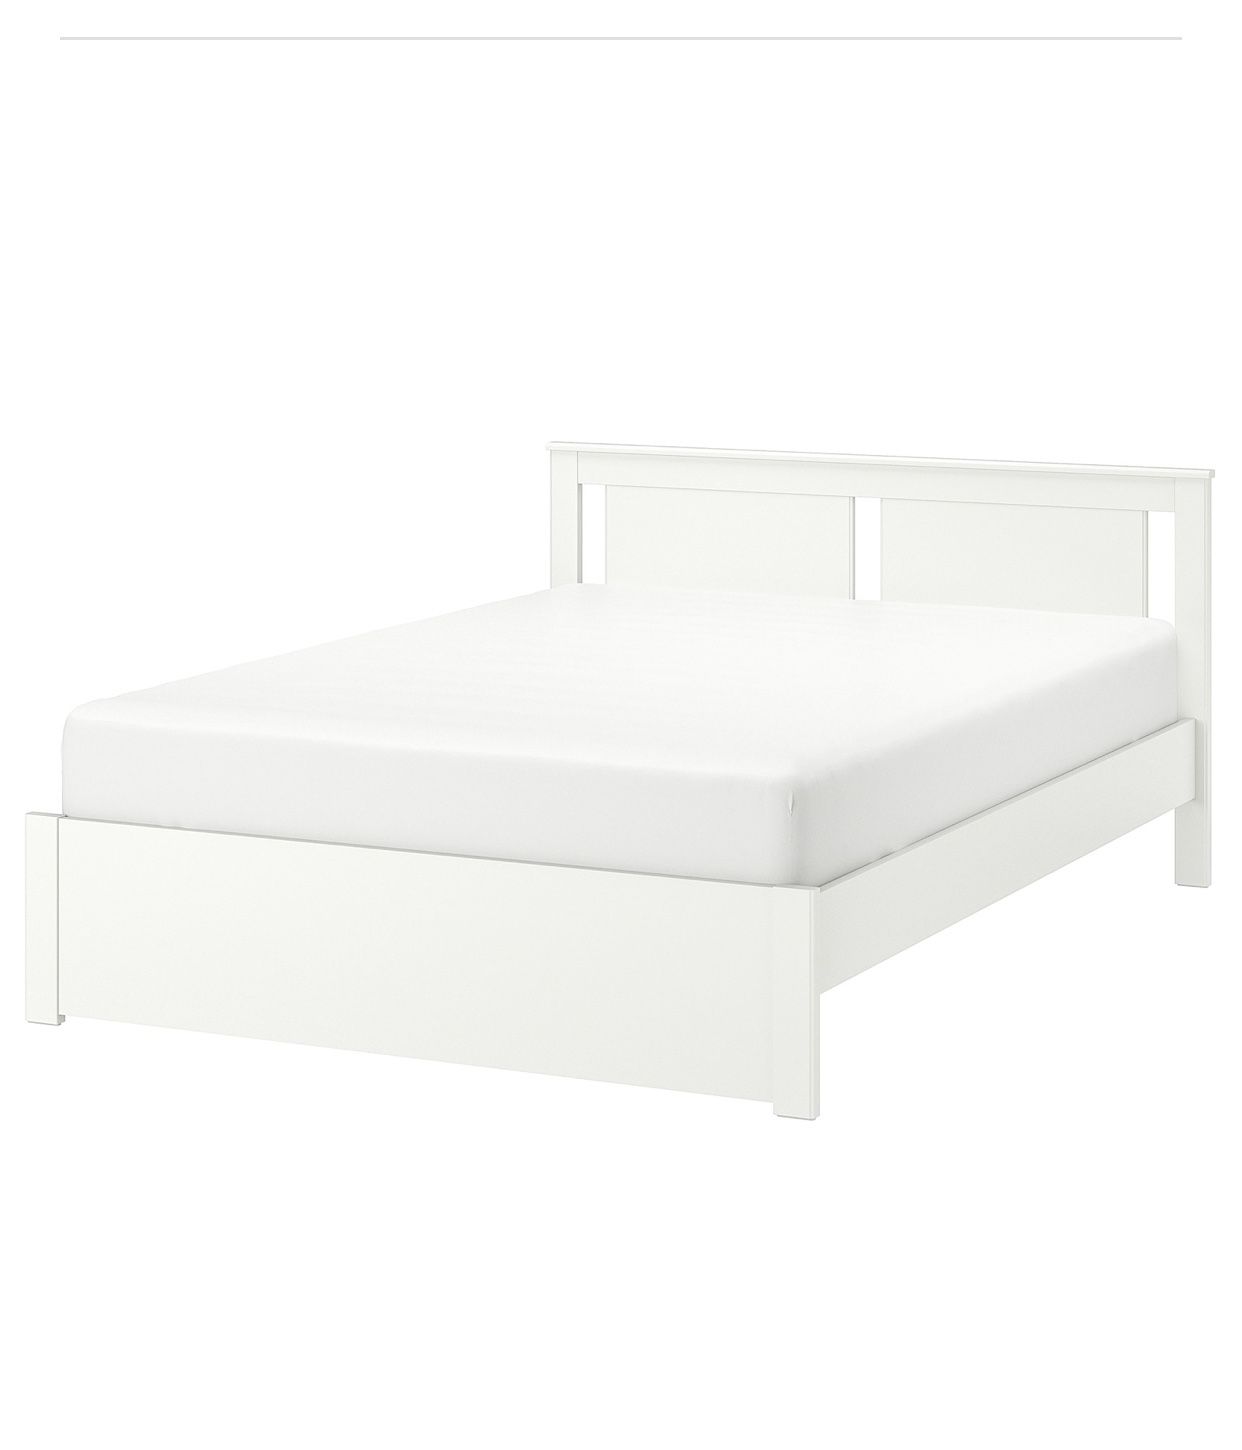 Bed frame and mattress perfect condition